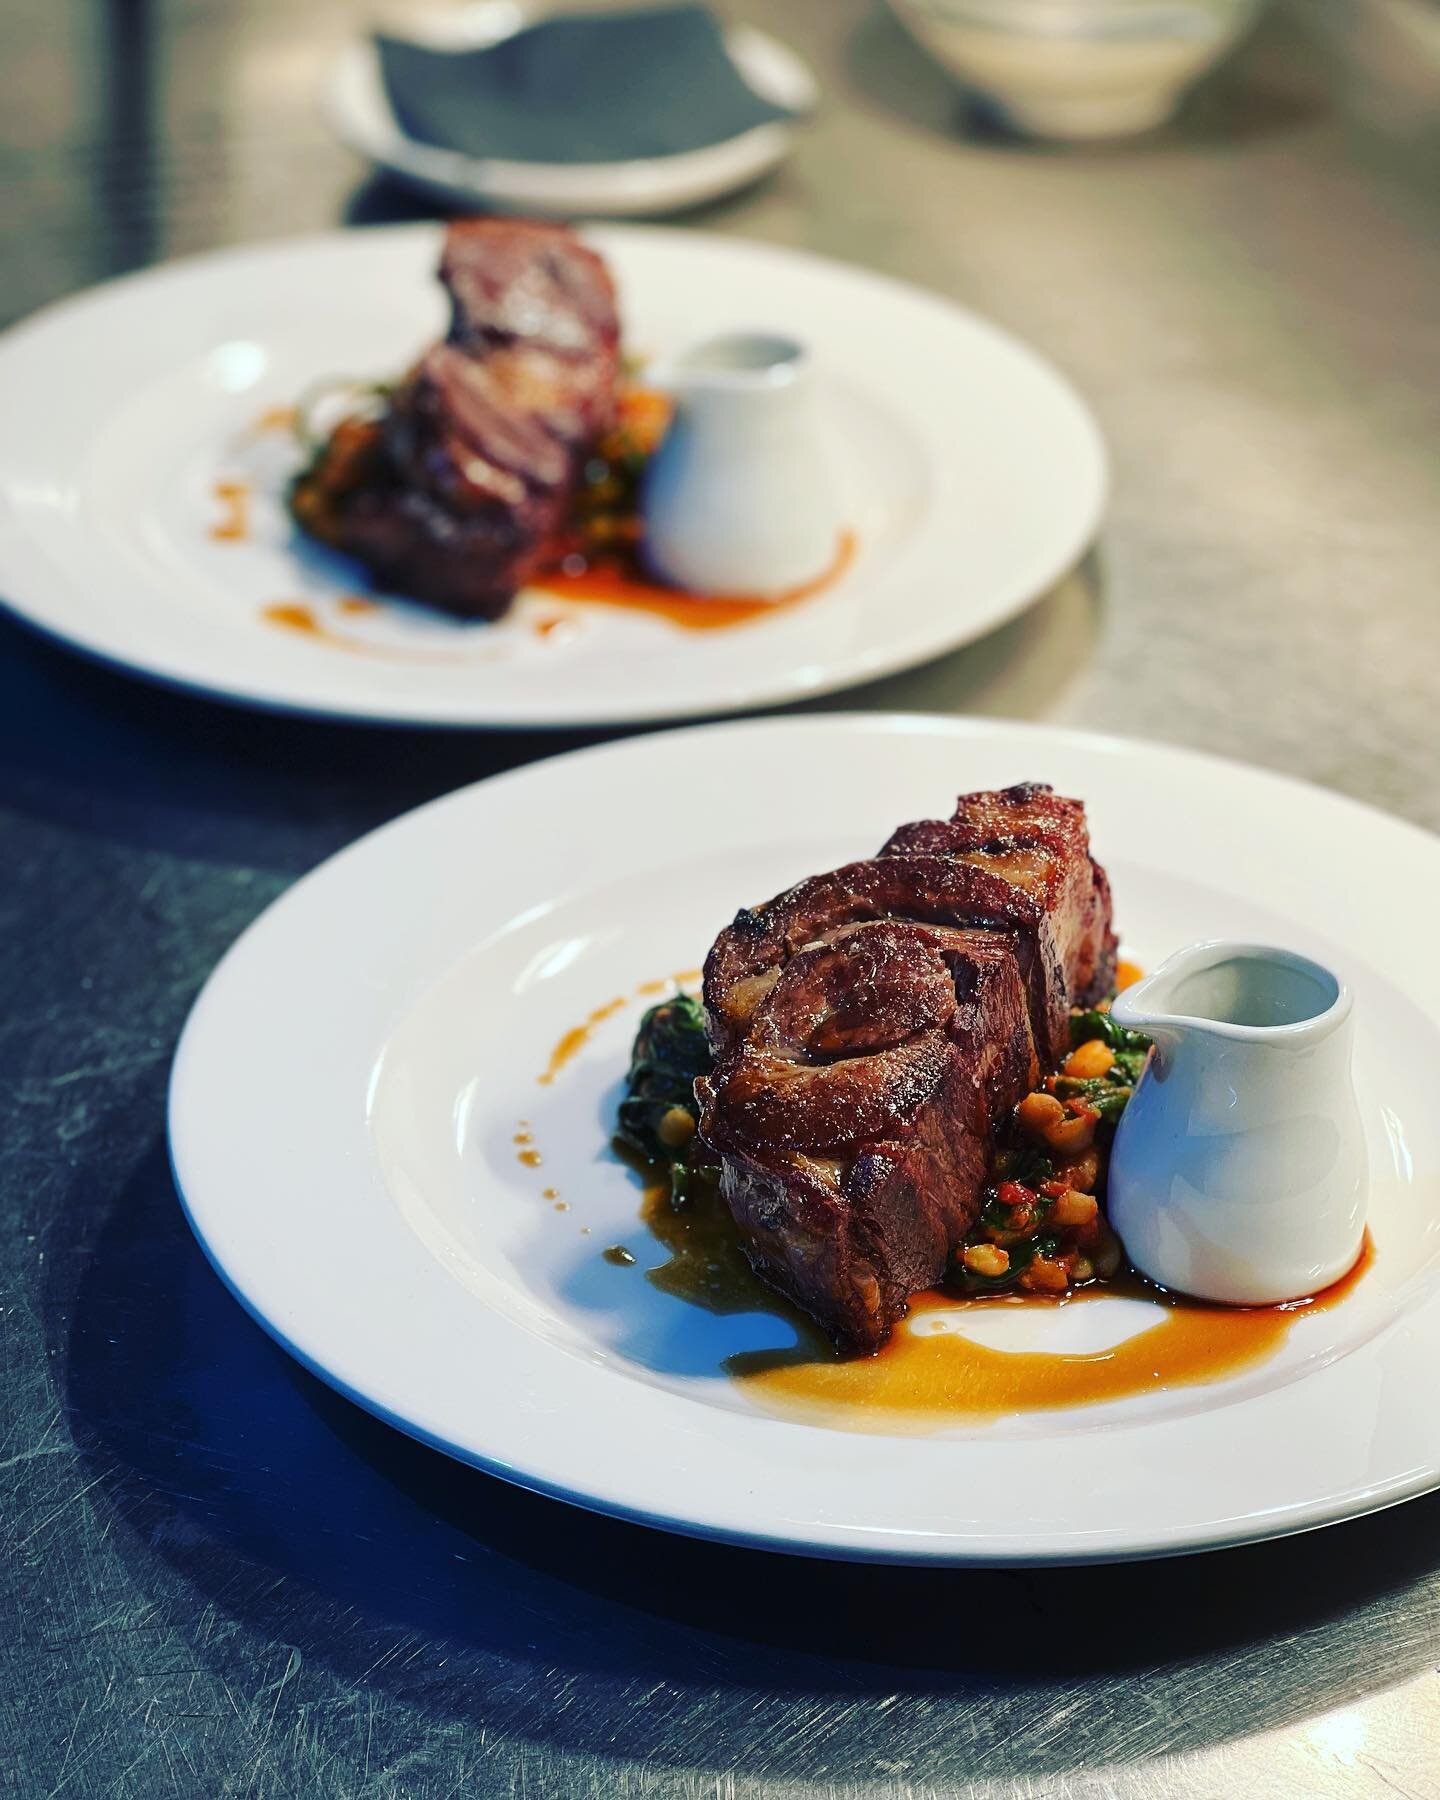 A few recent menu items.
.
.
.
.
.
.
#food #foodie #instafood #yummy #delicious #dinner #restaurant #tasty #lunch #eat #chef #foodphotography #michelinguide #pub #buckinghamshire #chicken #lamb #seabass #pollack #springgarlic #michelin #goodfood #yes